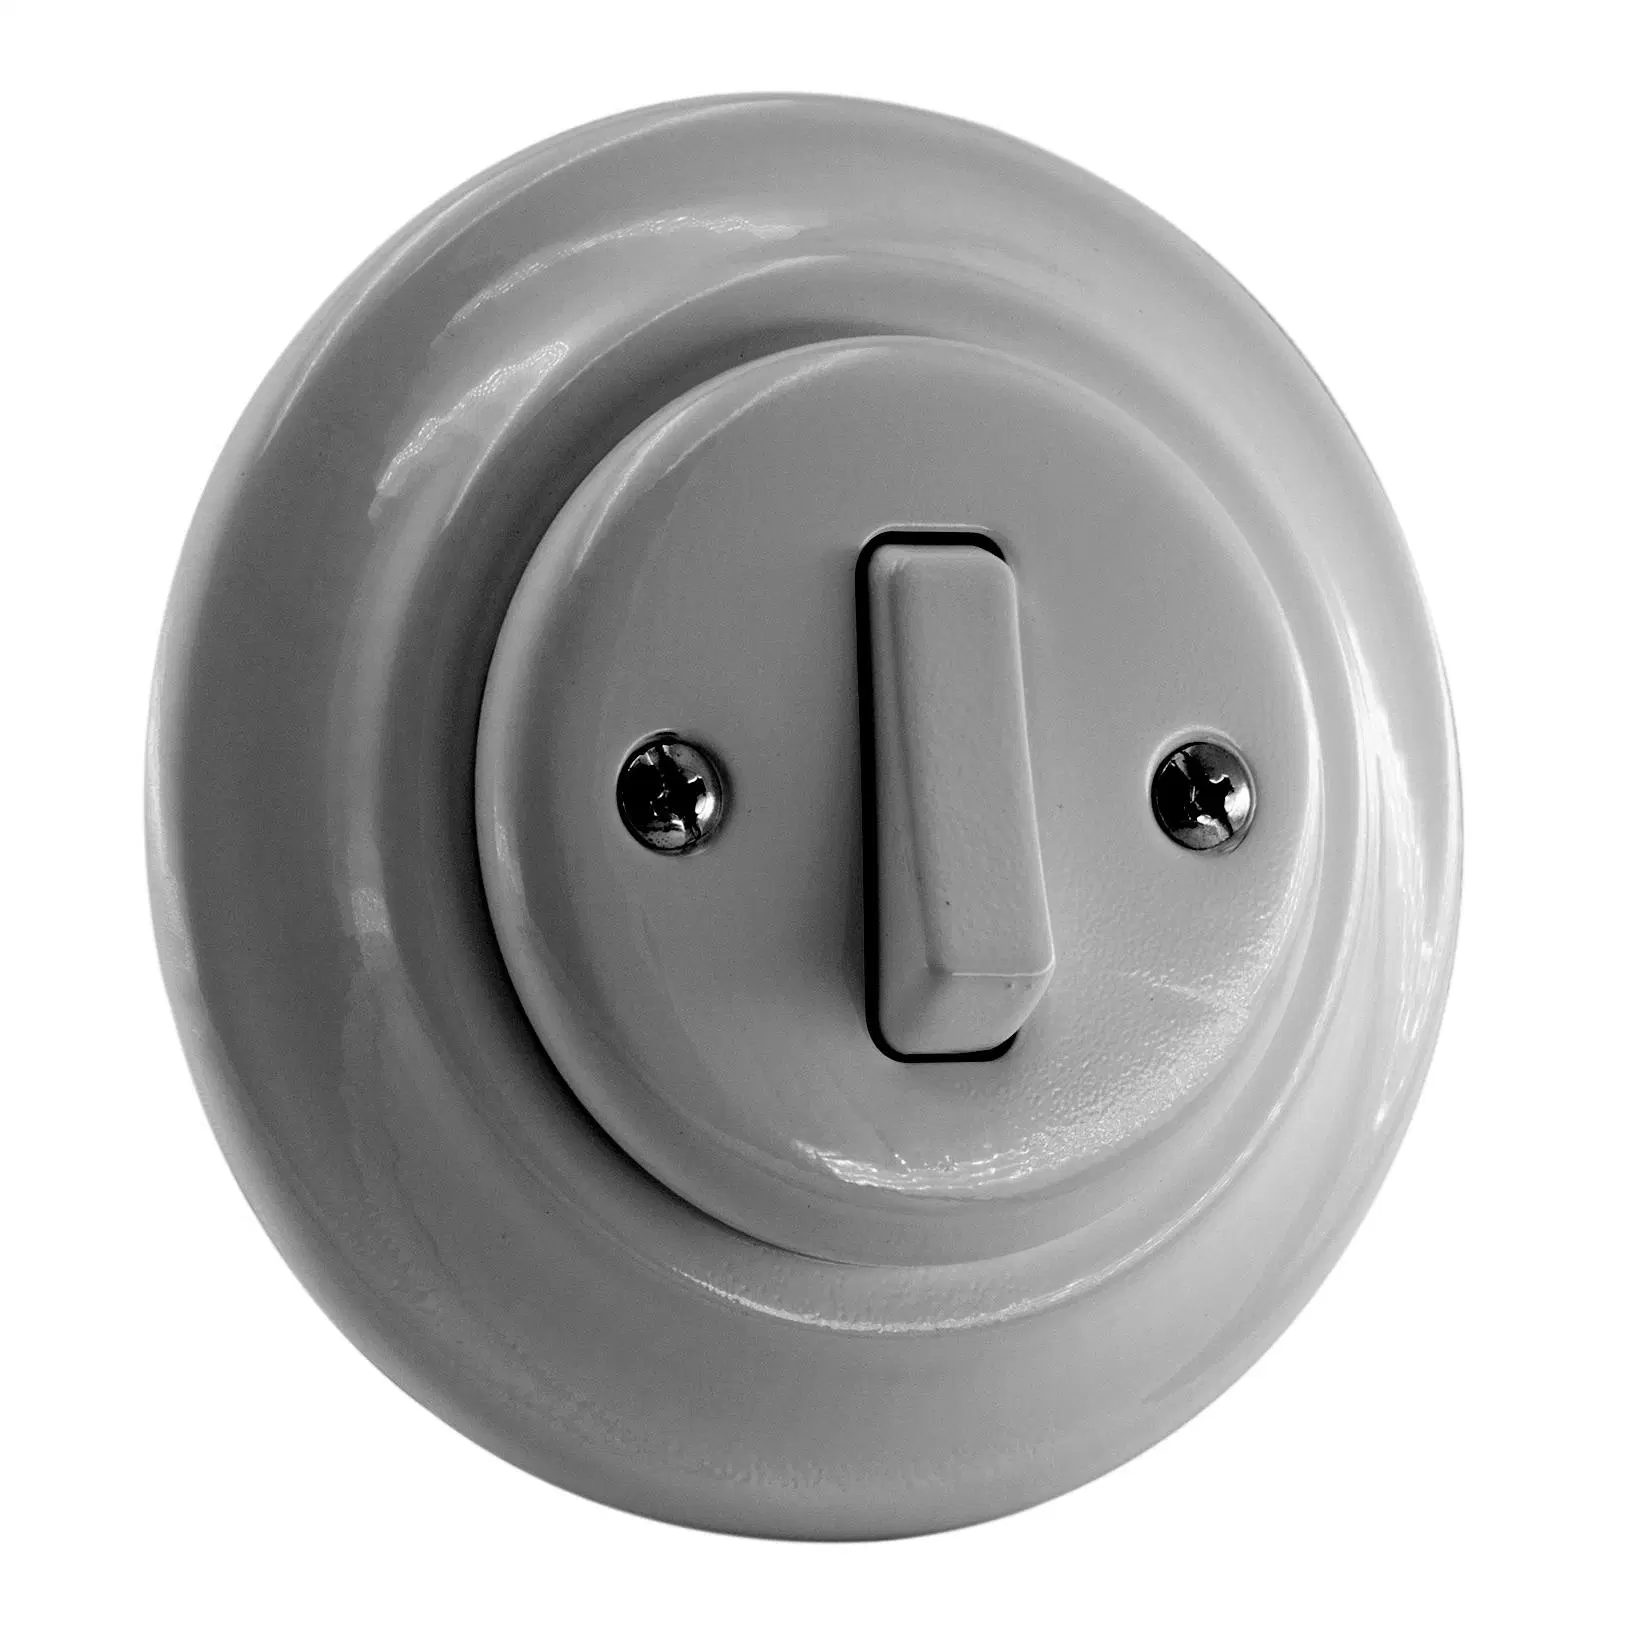 Convenient and Durable Porcelain Vintage Button Bell Switch for Controlling Pendant Lights Keruida Ceramic